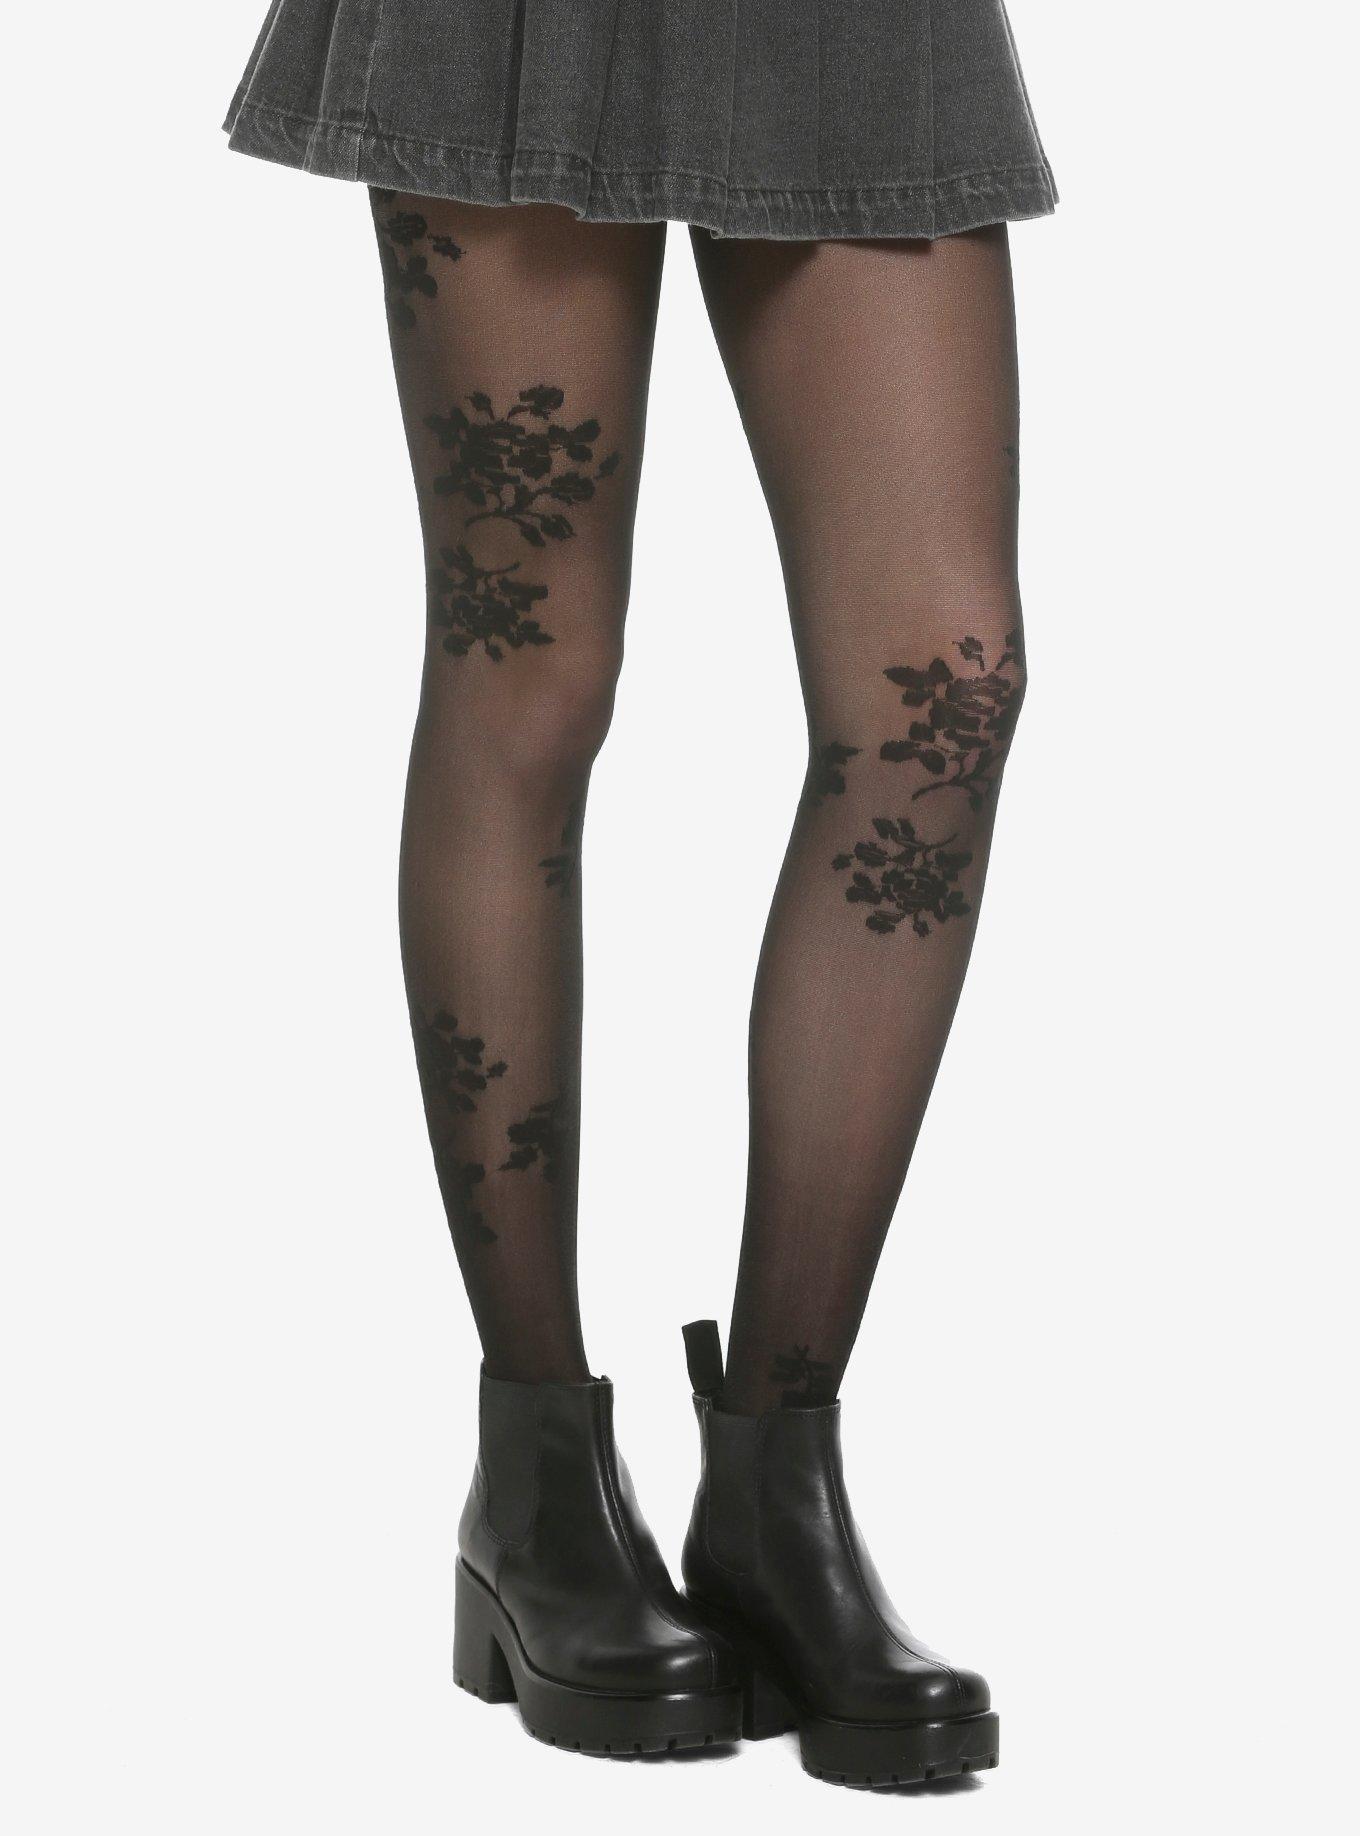 23 Ways to Wear Floral Print All Winter Long  Floral tights, Lace tights,  Black floral tights